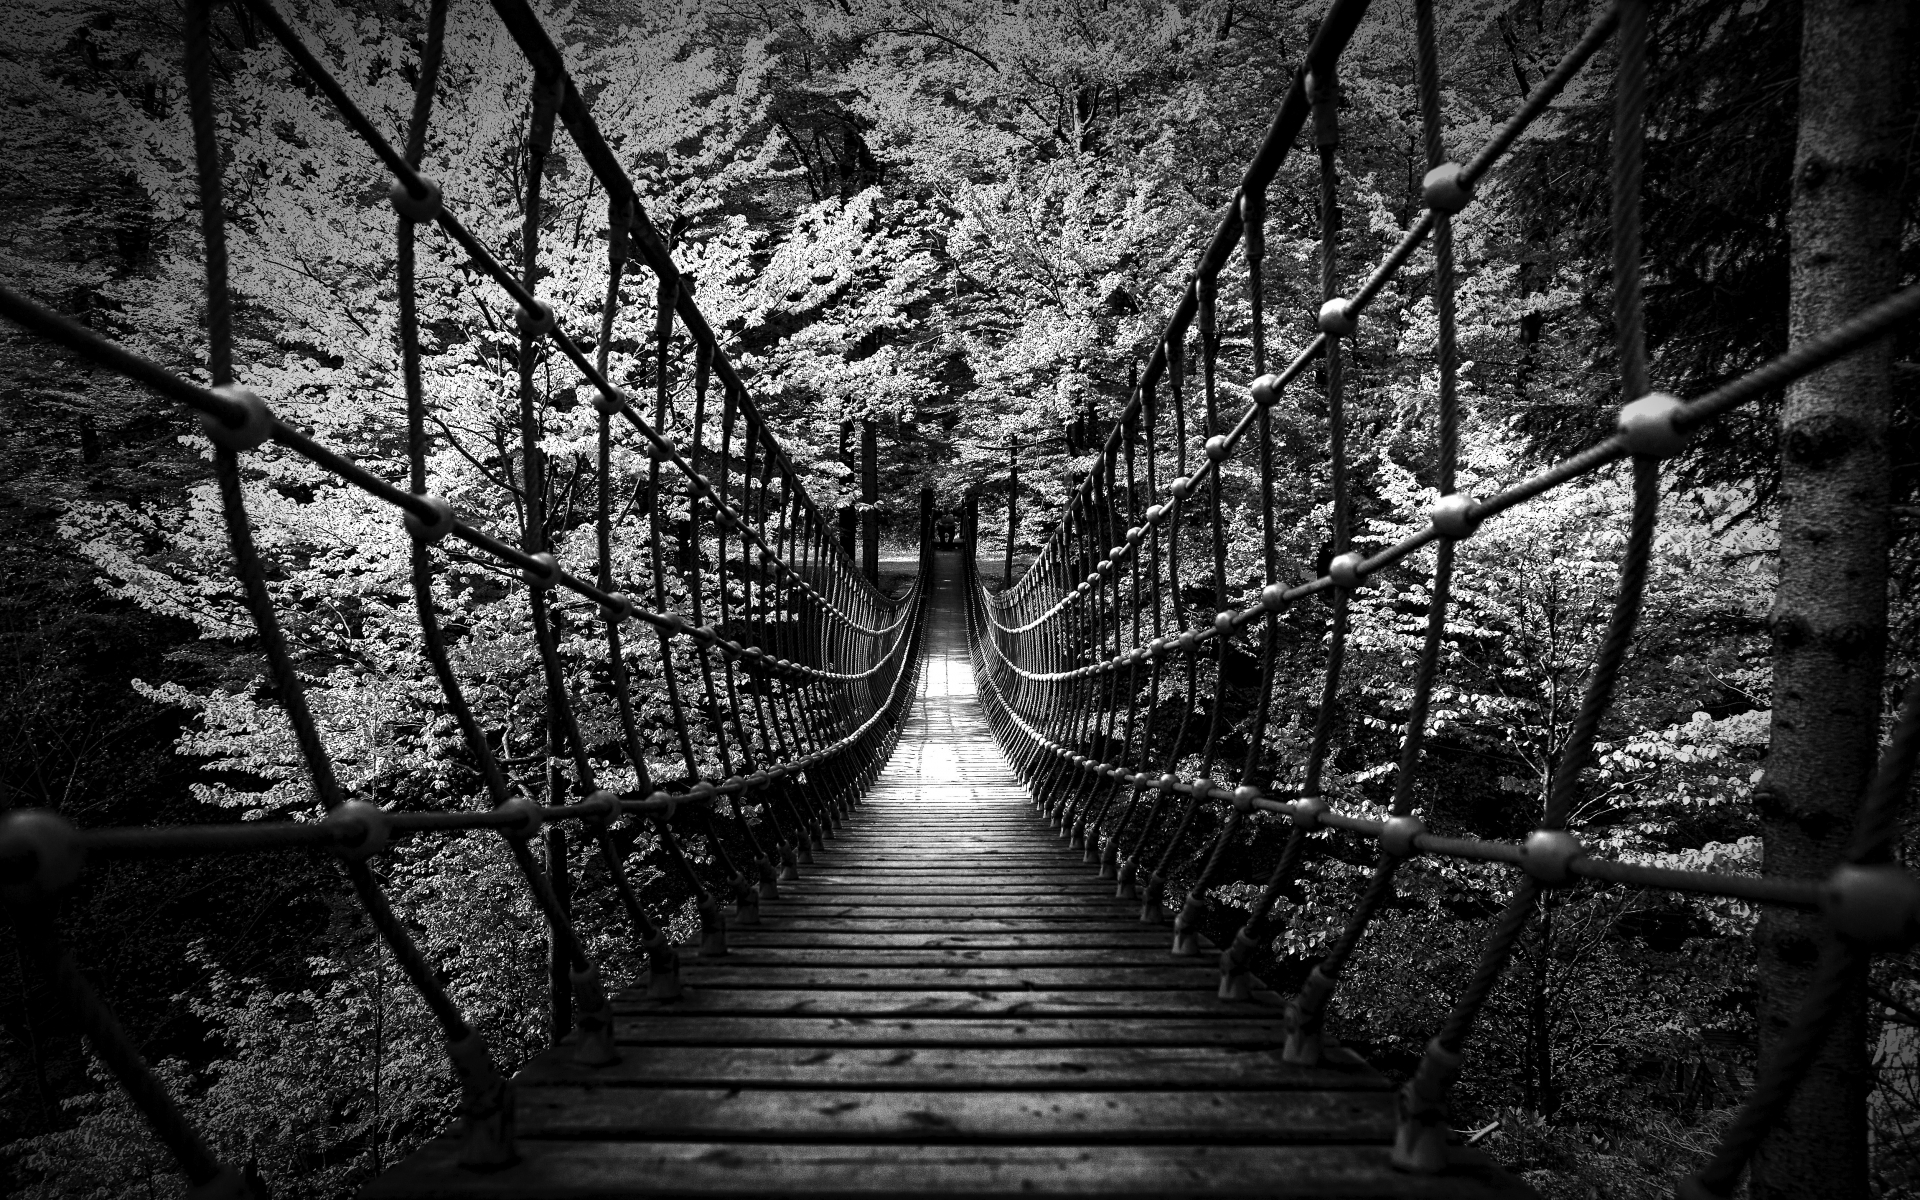 monochrome, Black, White, B w, Landscapes, Nature, Wood, Rope, Scary, Bridges, Trees, Forest, Photography, Architecture Wallpaper